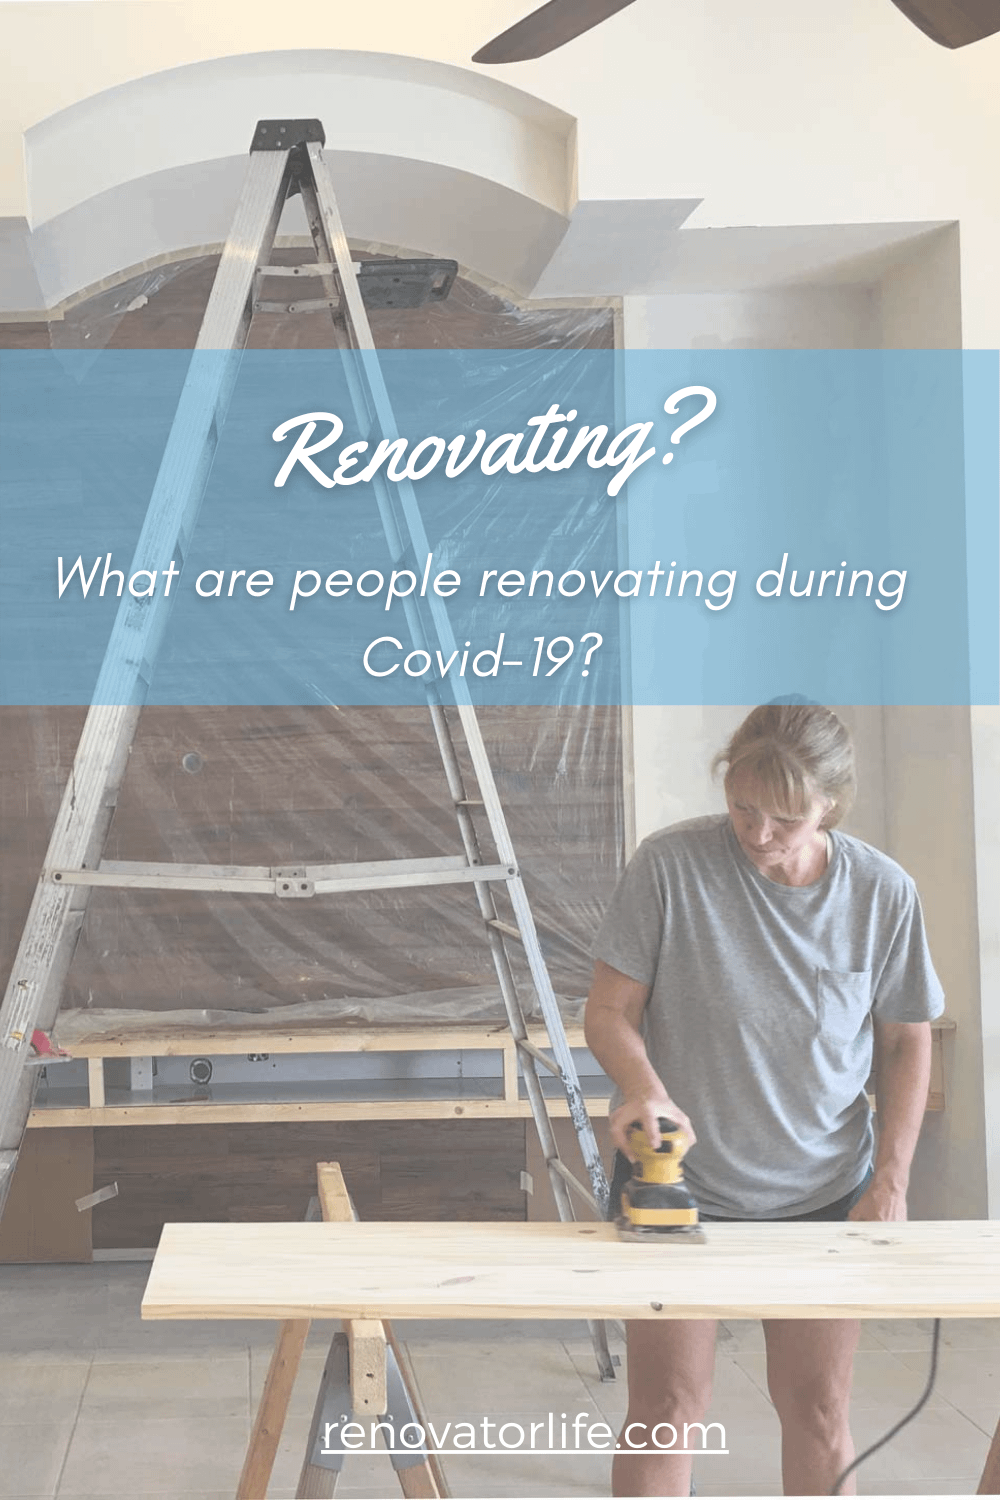 What are people renovating during Covid-19